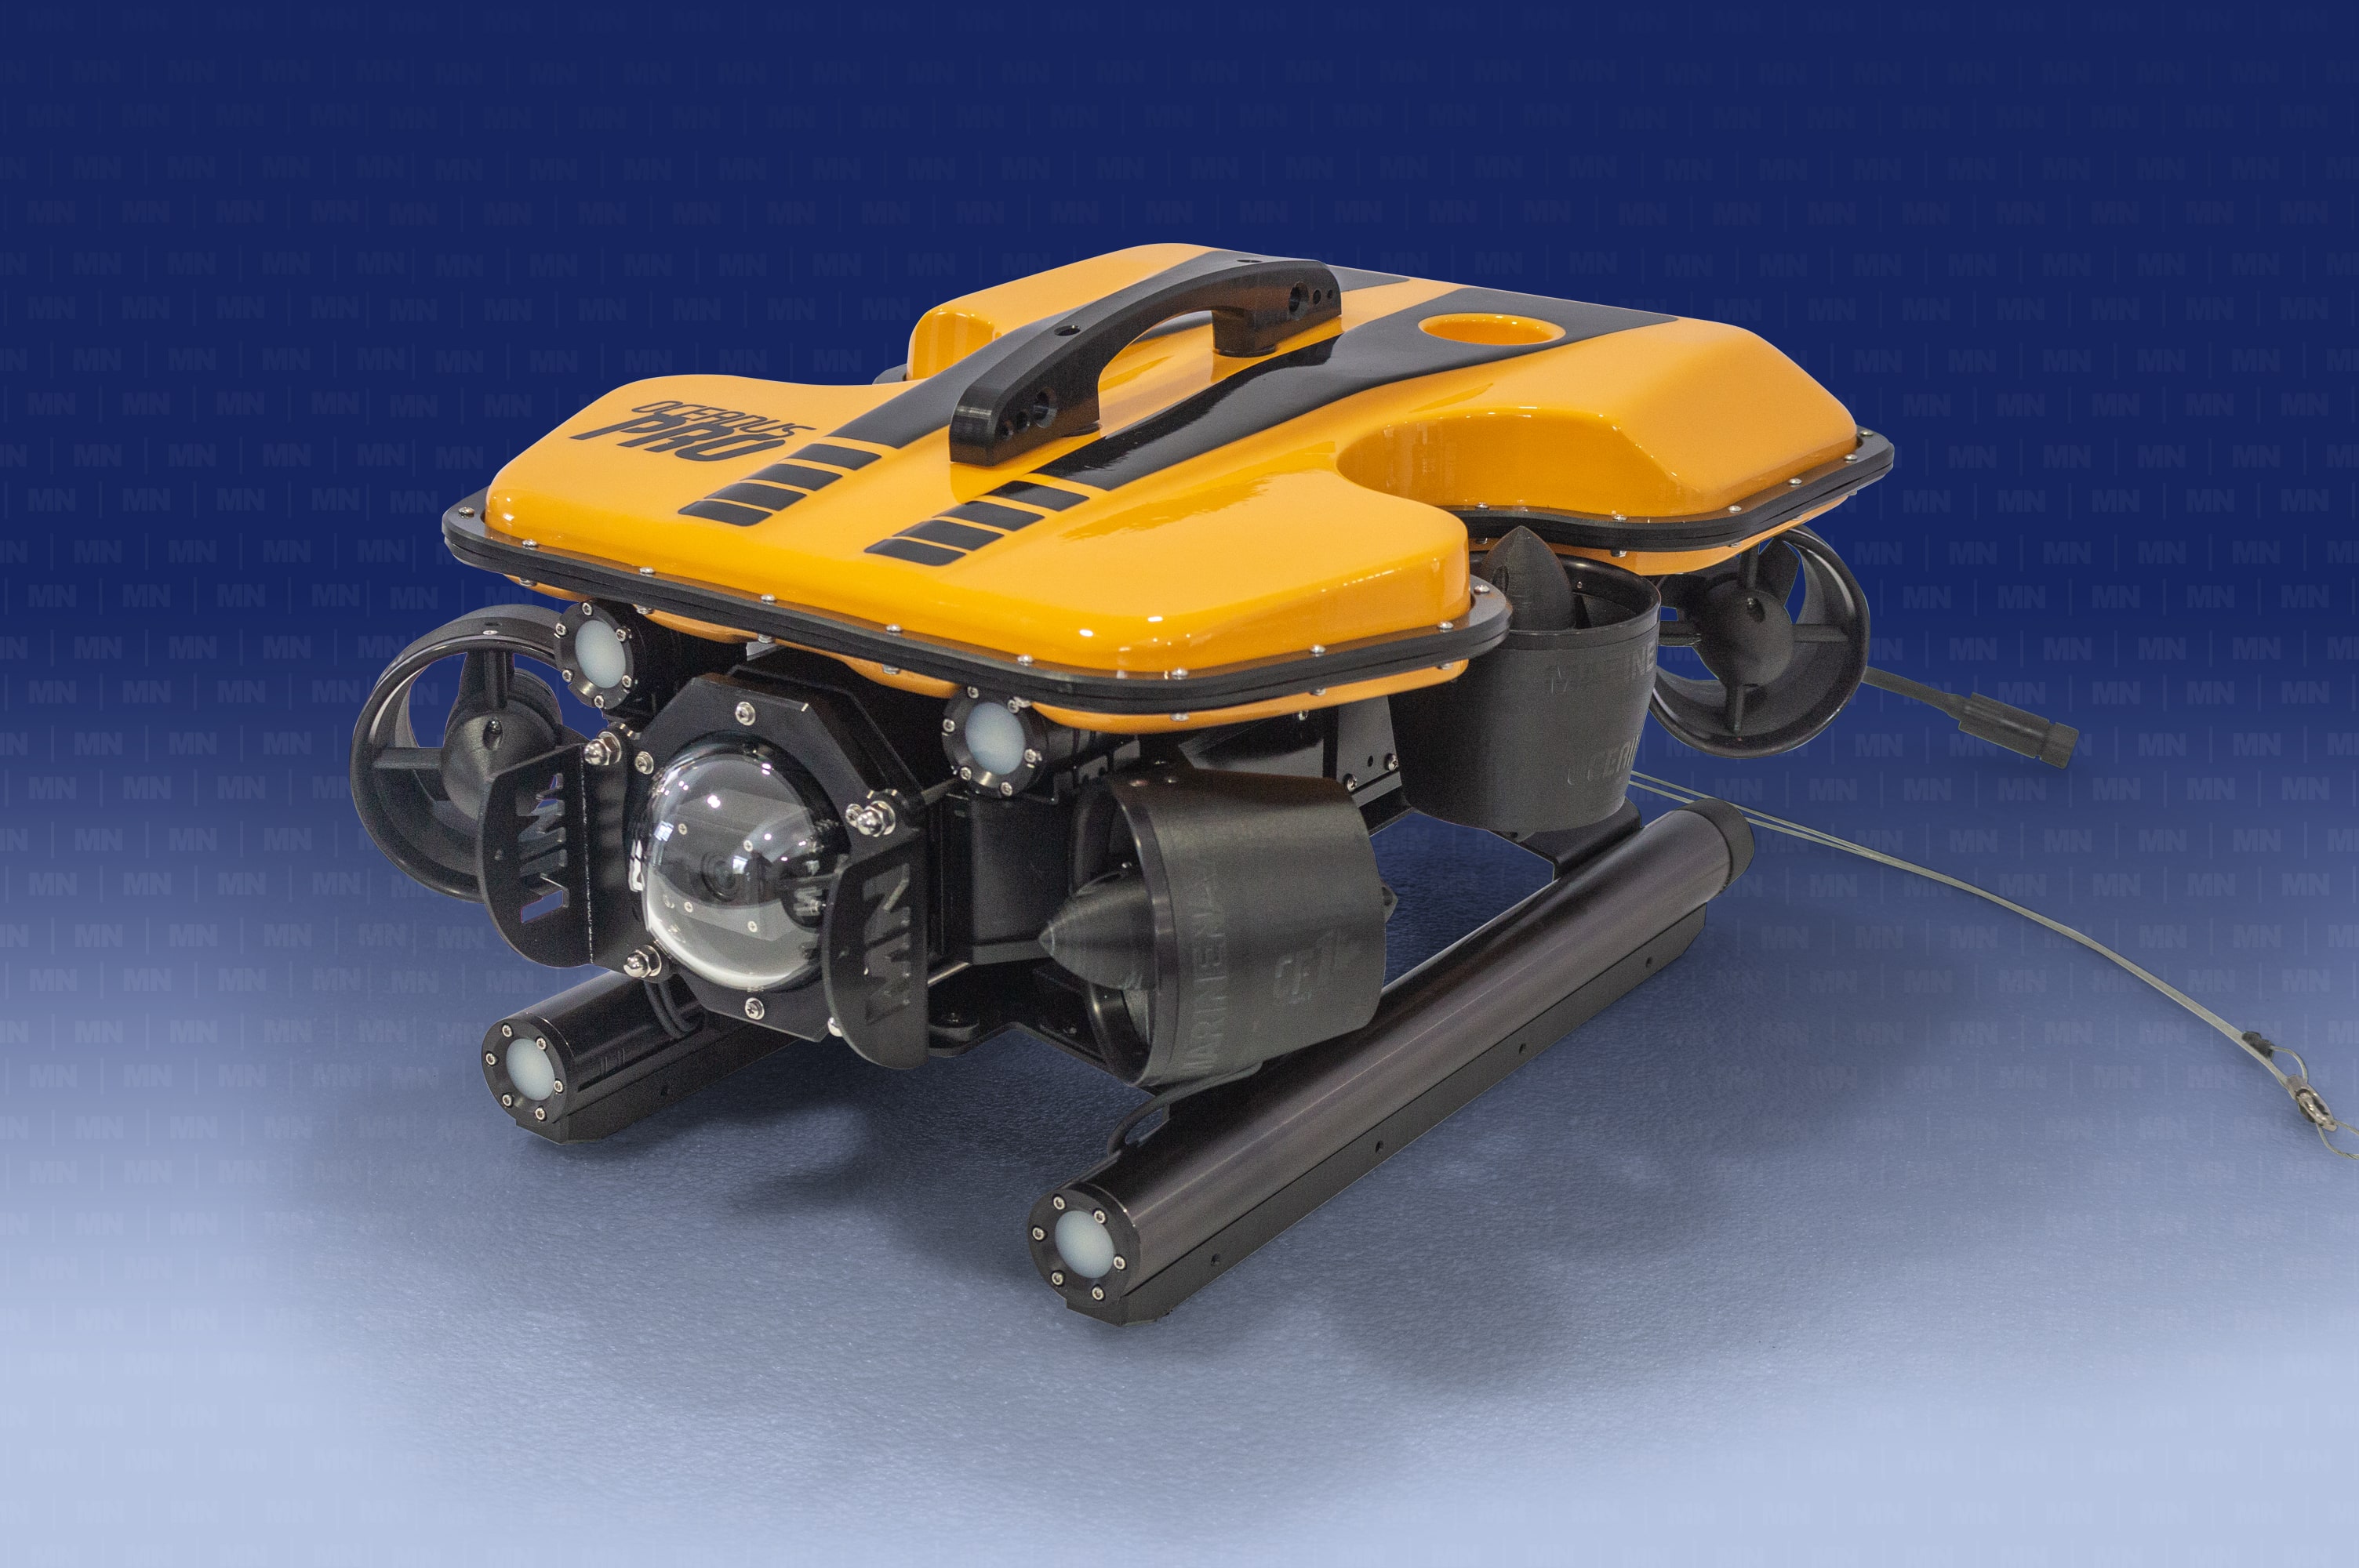 A mission-ready ROV system with a diverse range of  attachment options for deep-dive recovery, defense, scientific research, and complex inspection tasks.